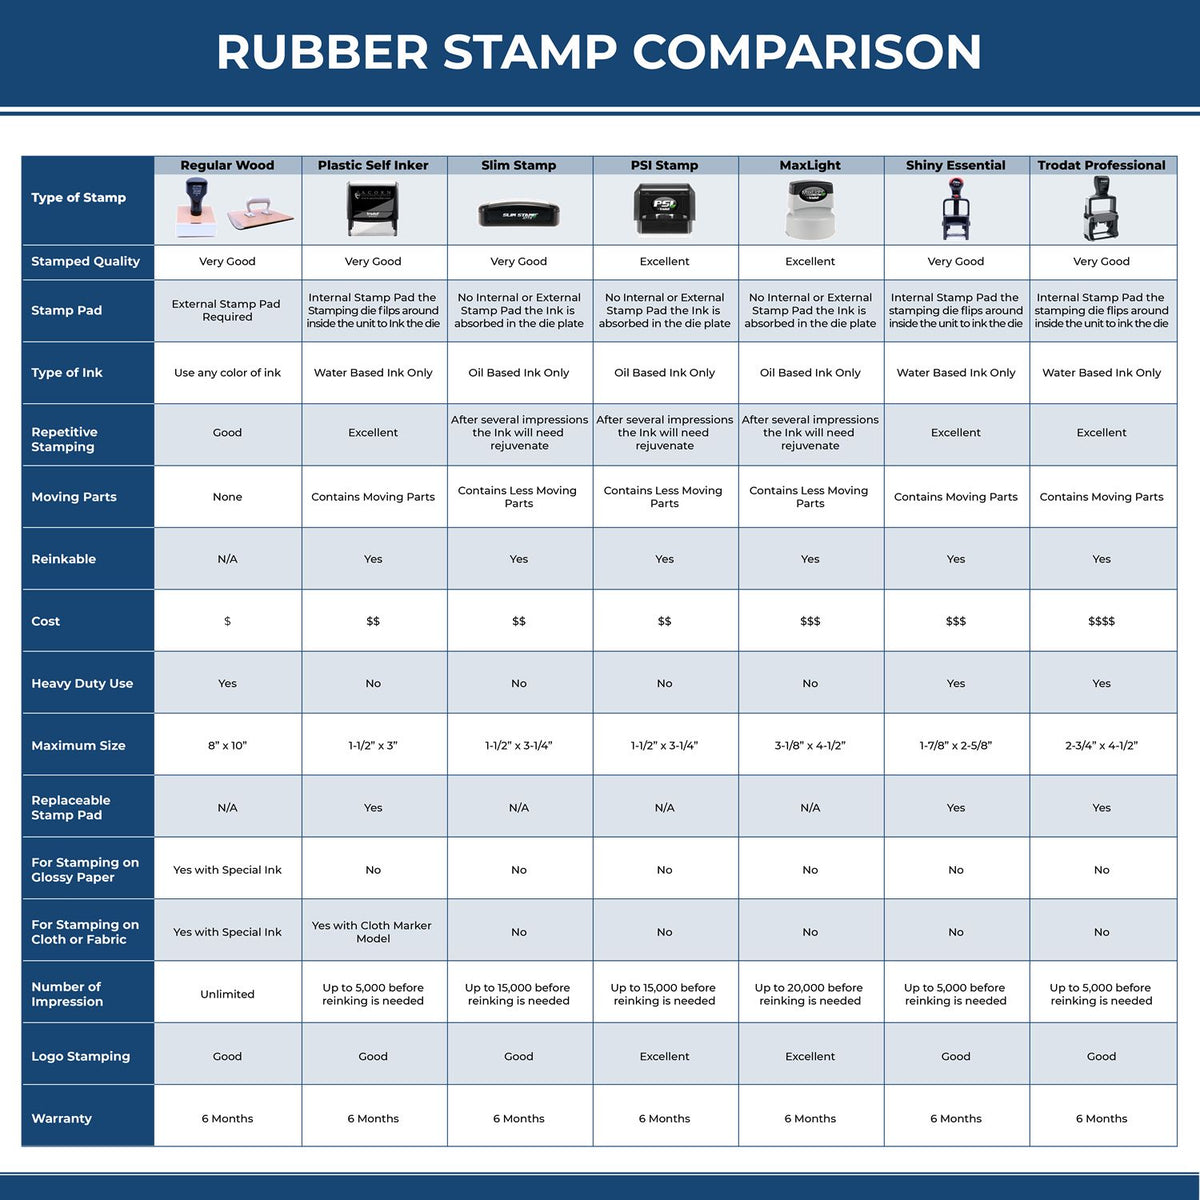 A comparison chart for the different types of mount models available for the Super Slim Alabama Notary Public Stamp.